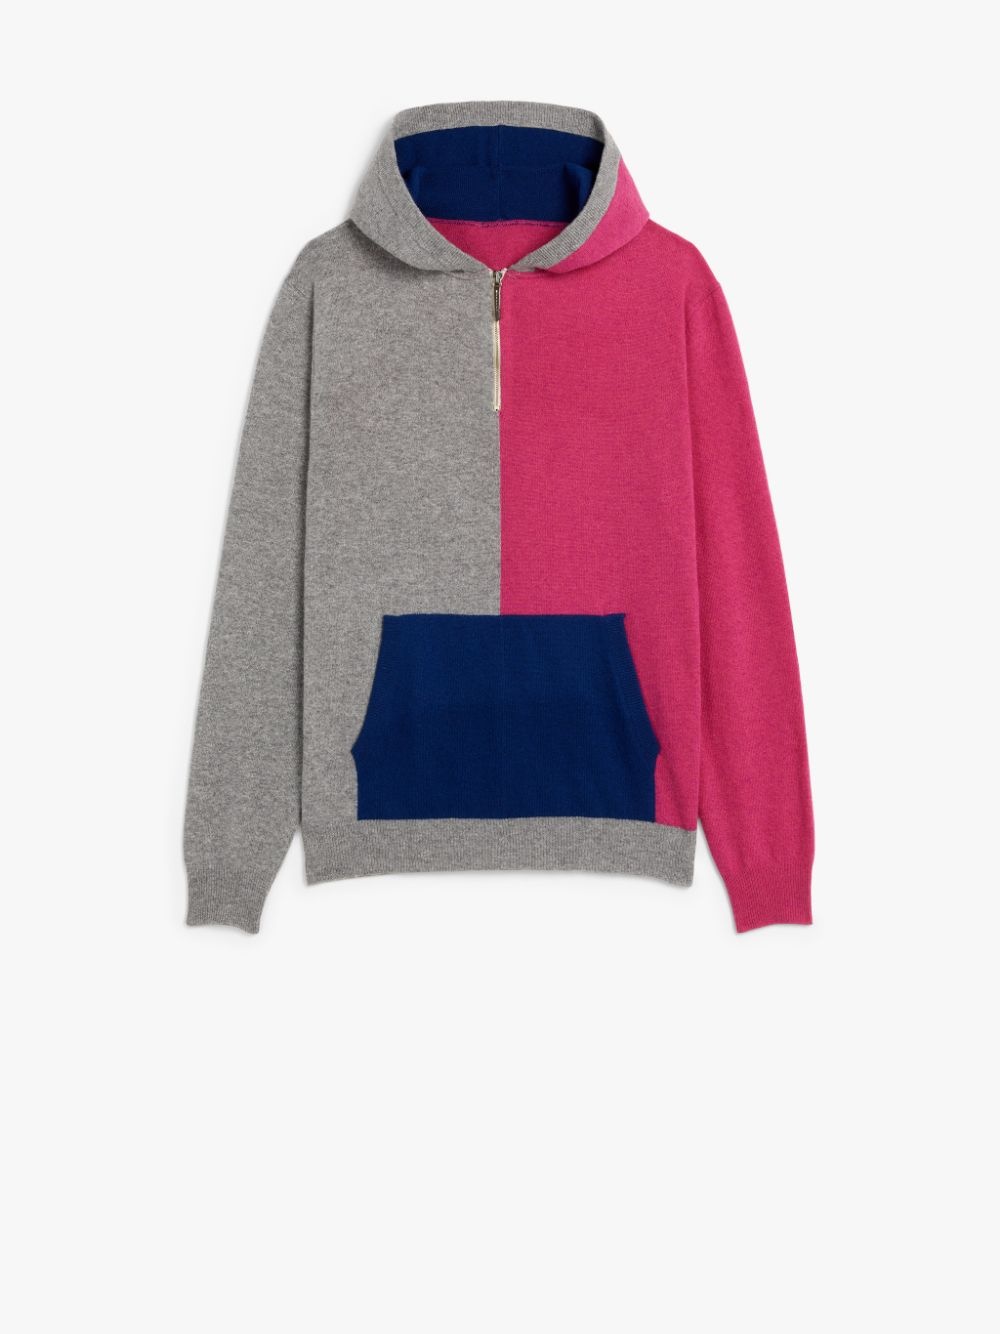 DOUBLE AGENT PINK WOOL HOODED SWEATER | GKM-201 - 1